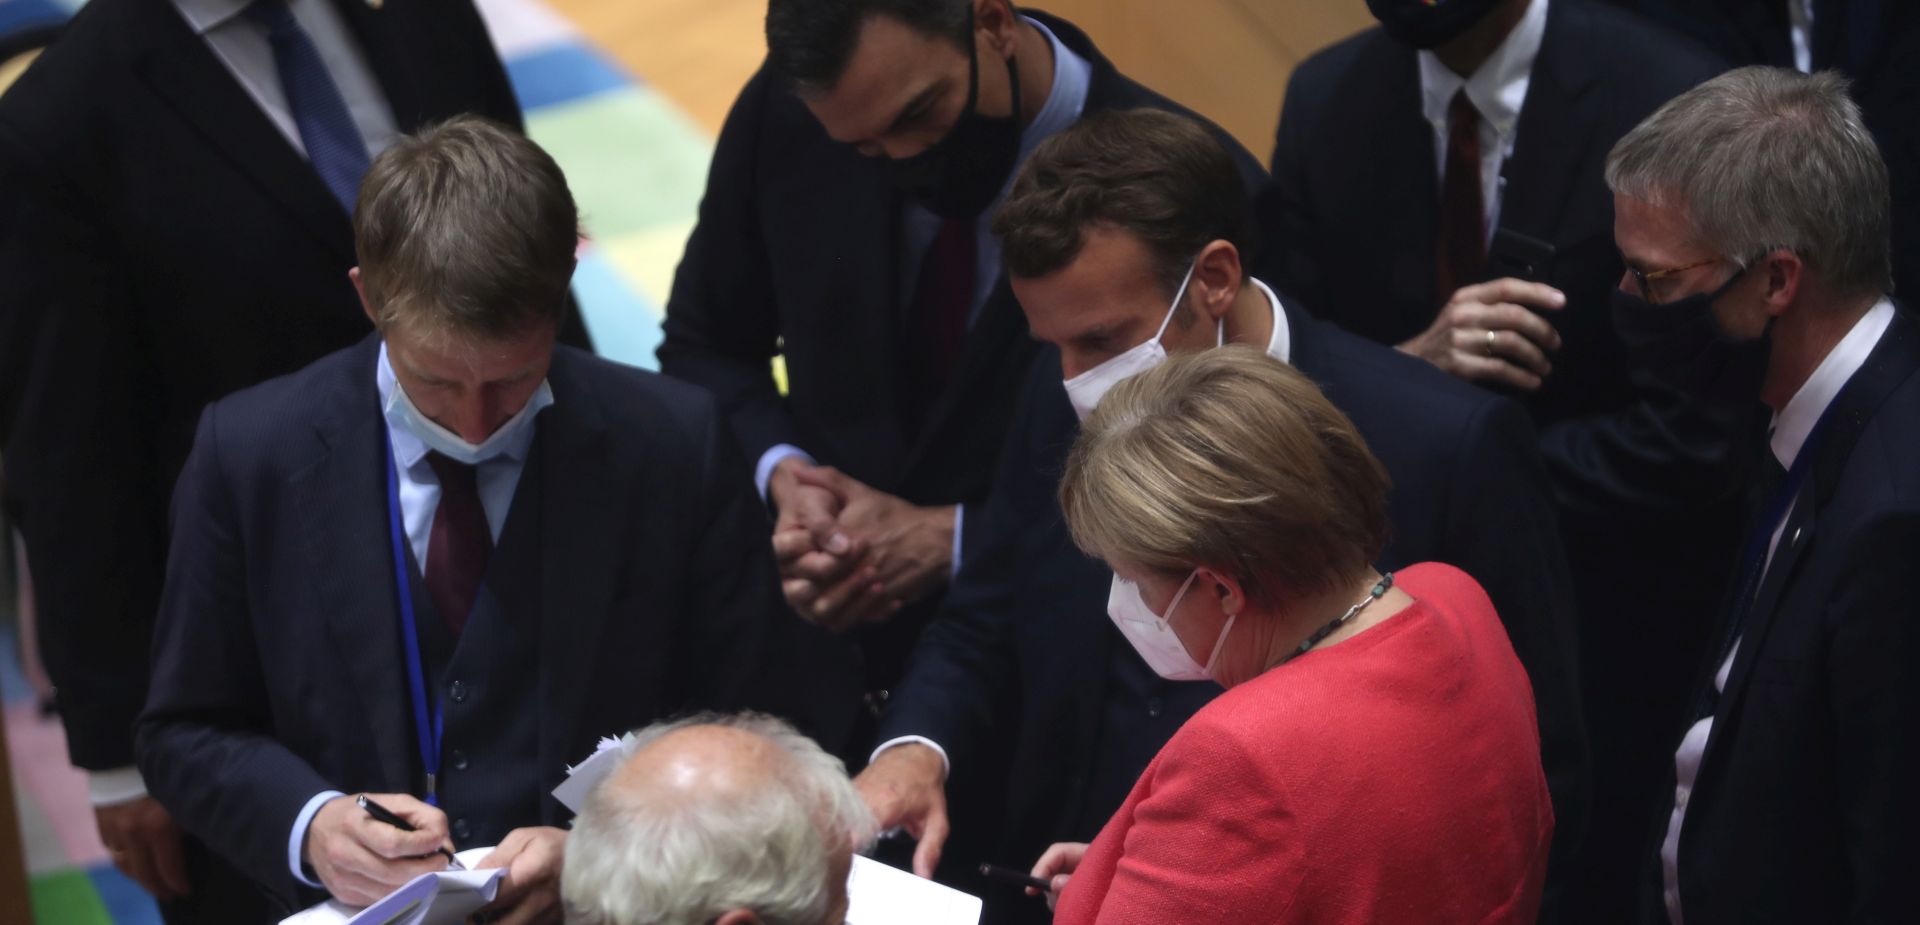 epa08557210 German Chancellor Angela Merkel (C-R) chats with French President Emmanuel Macron (C), Spanish Prime Minister Pedro Sanchez (C-L) and other dignitaries while they all wear face masks during a roundtable discussion on the fourth day of the ongoing Special European Council leaders' summit, the first face-to-face meeting between EU statespeople held since the eruption of the ongoing pandemic of the COVID-19 disease caused by the SARS-CoV-2 coronavirus, in Brussels, Belgium, 20 July 2020. The heads of state and government discussed the bloc's response to the pandemic and the new long-term budget.  EPA/FRANCISCO SECO / POOL